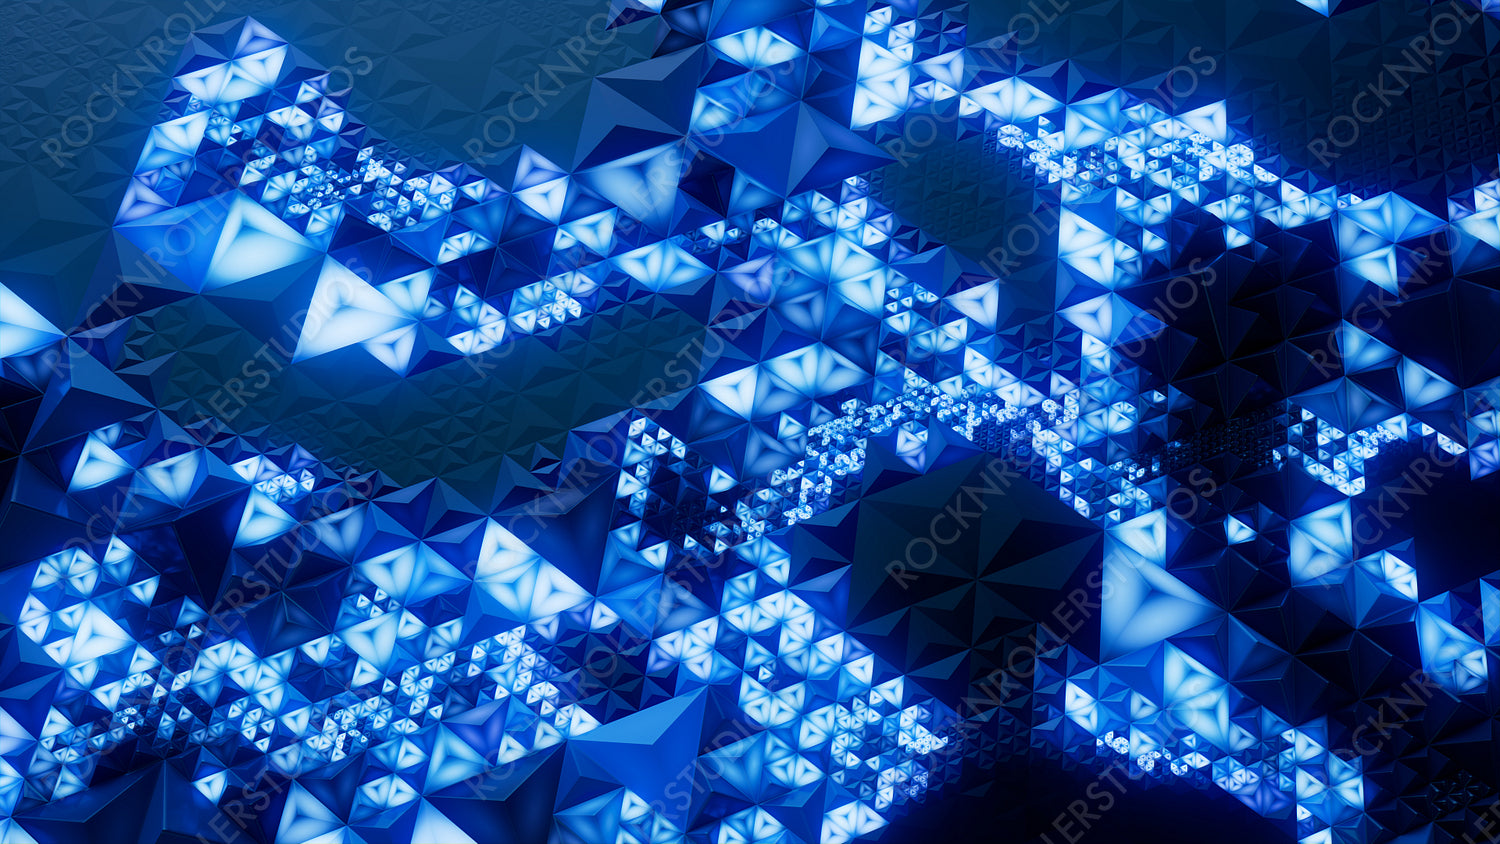 Neon High Tech Surface with Triangular Pyramids. Illuminated, Blue Abstract 3d Texture.